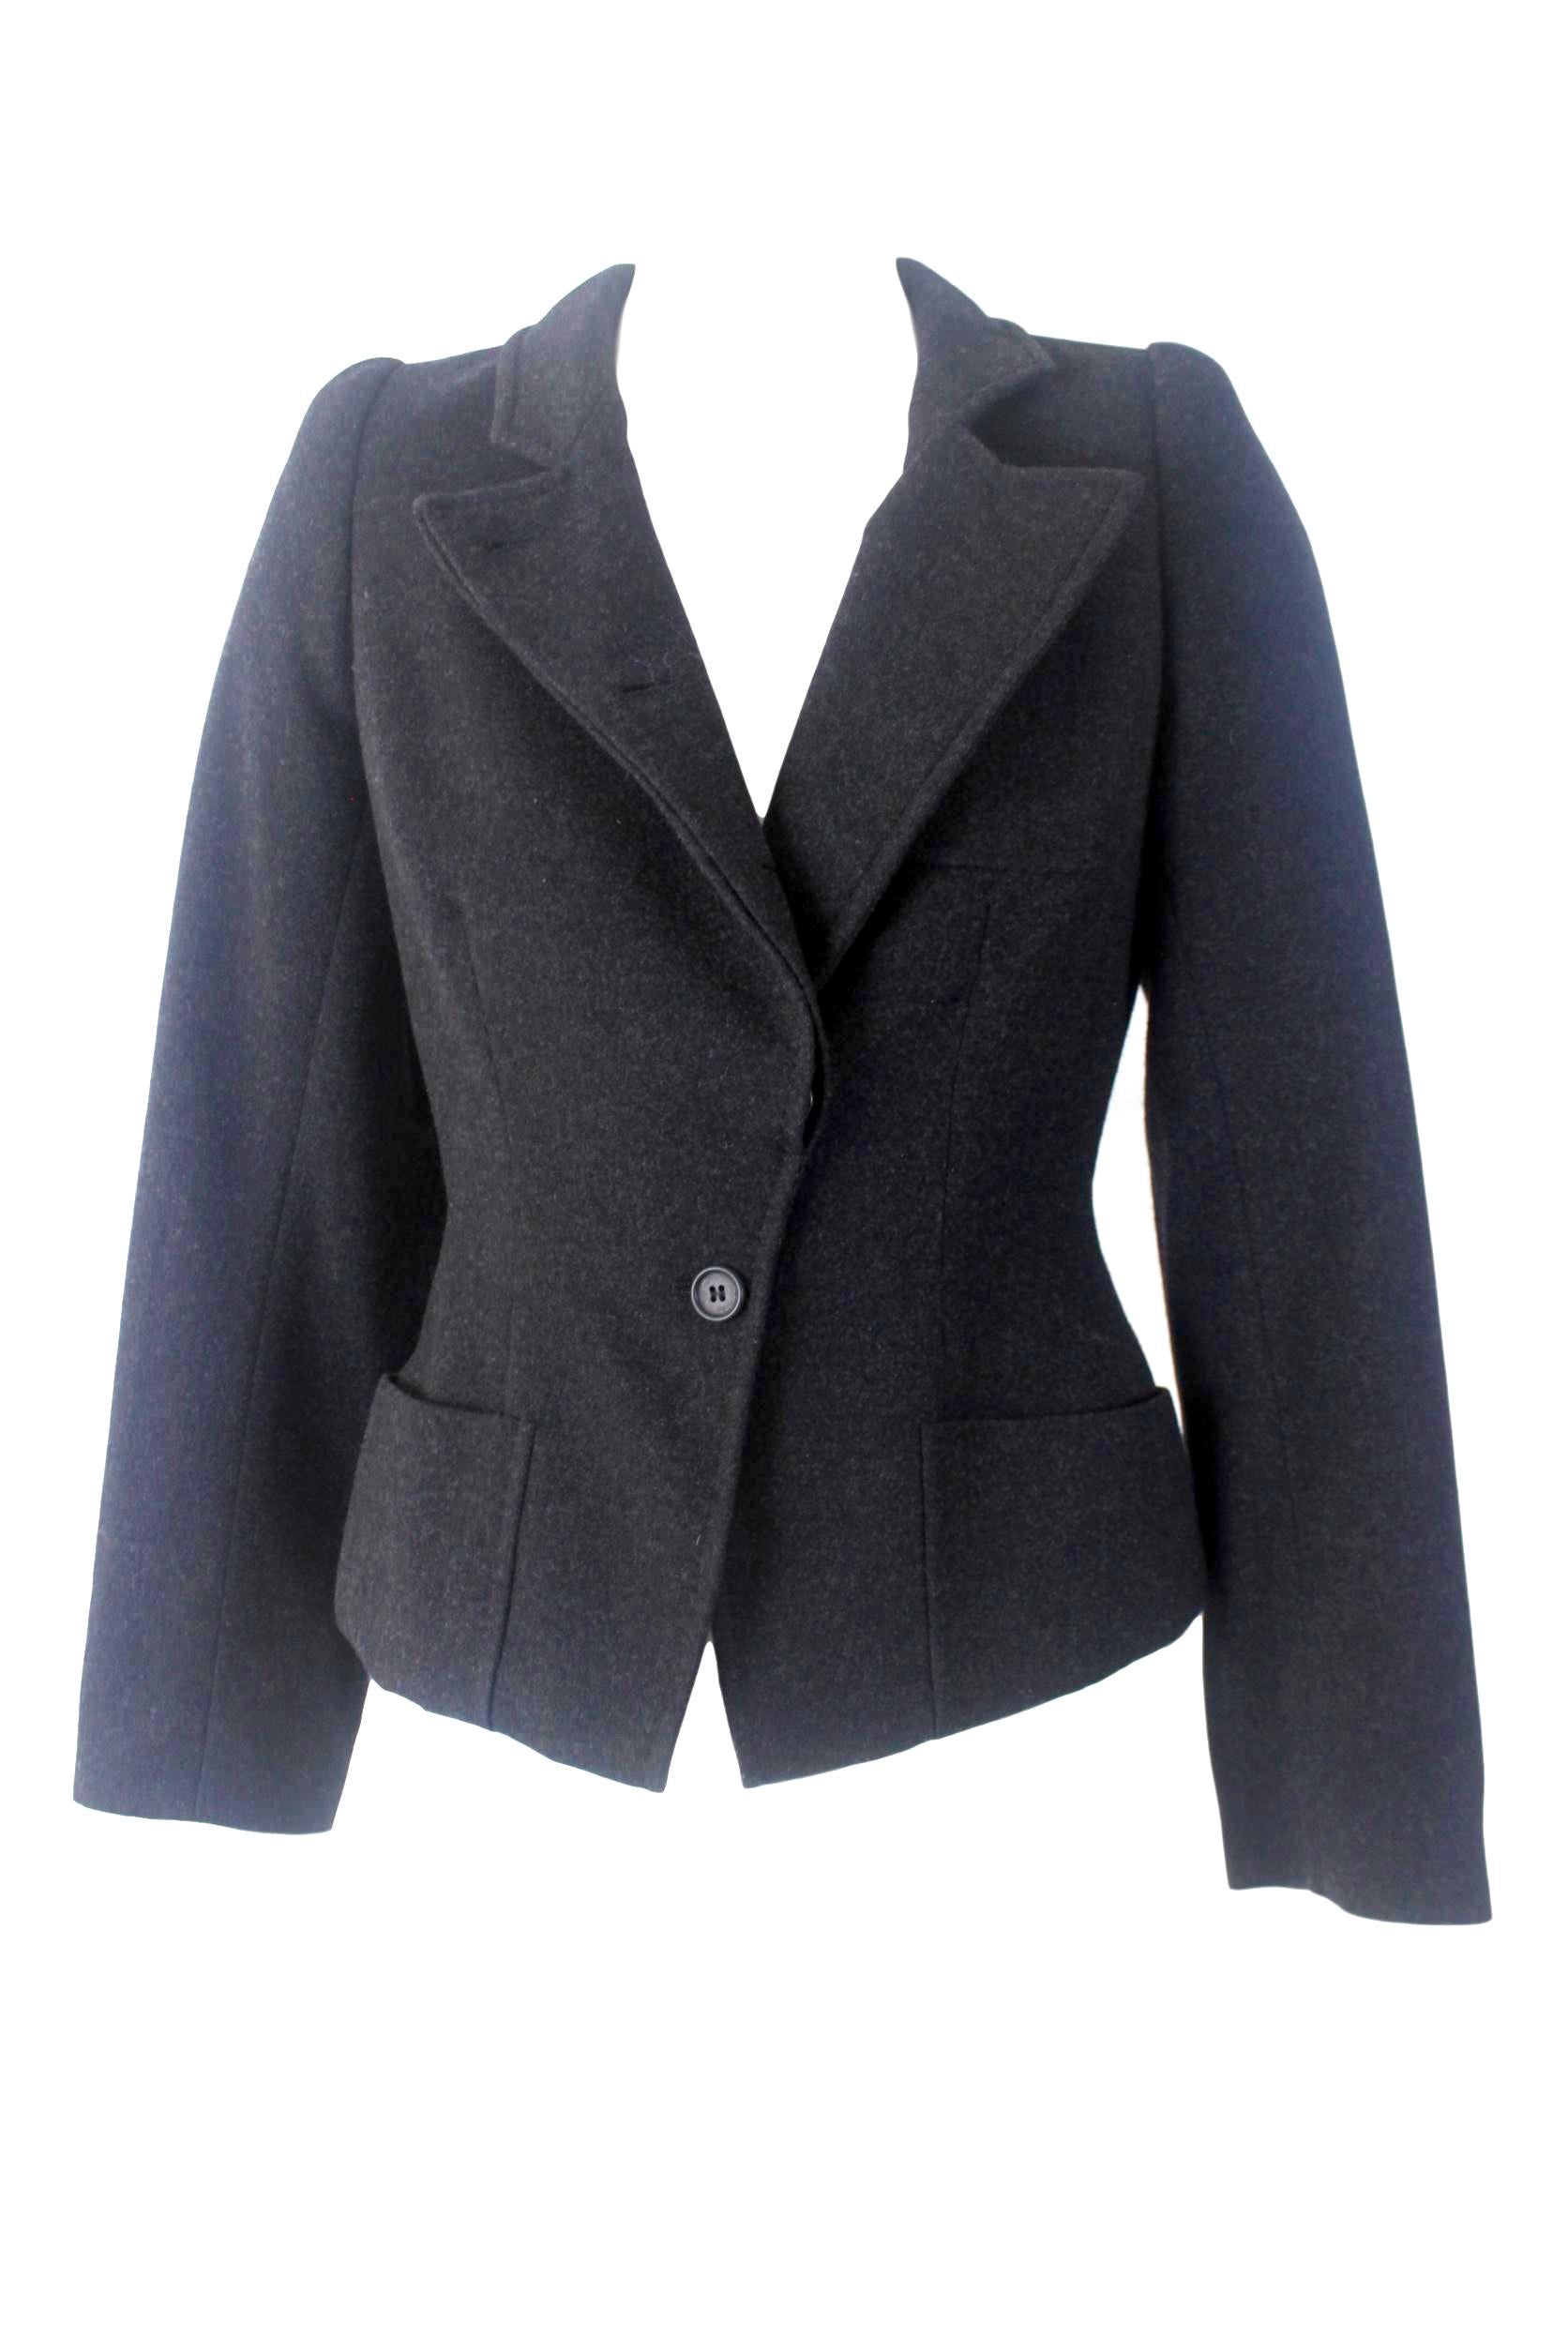 Women's Alexander McQueen Vintage Black Wool and Cashmere Jacket For Sale